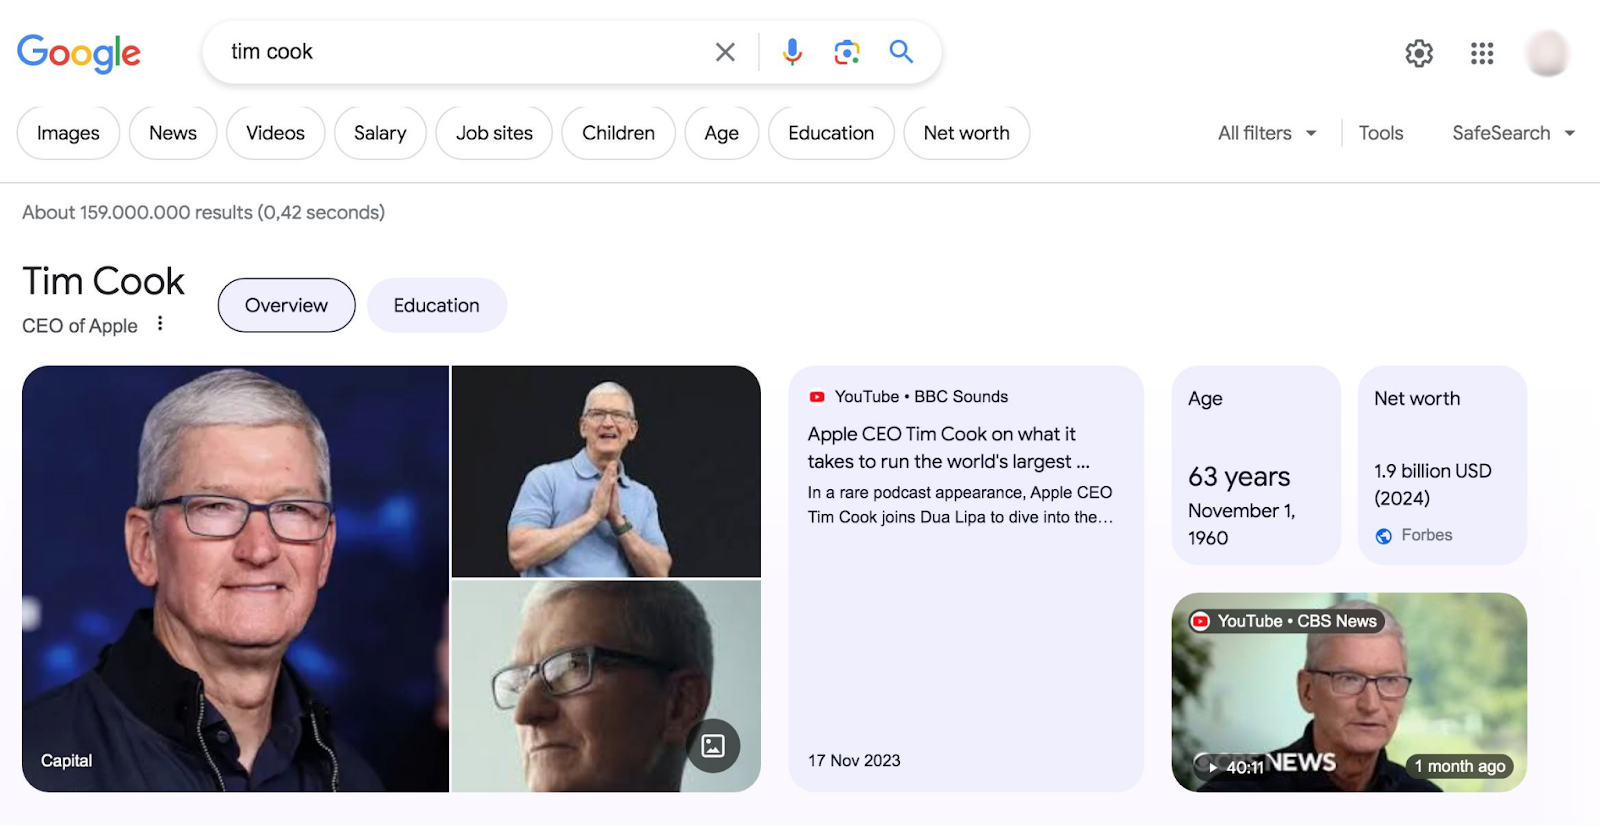 Google's knowledge graph result for “tim cook" query